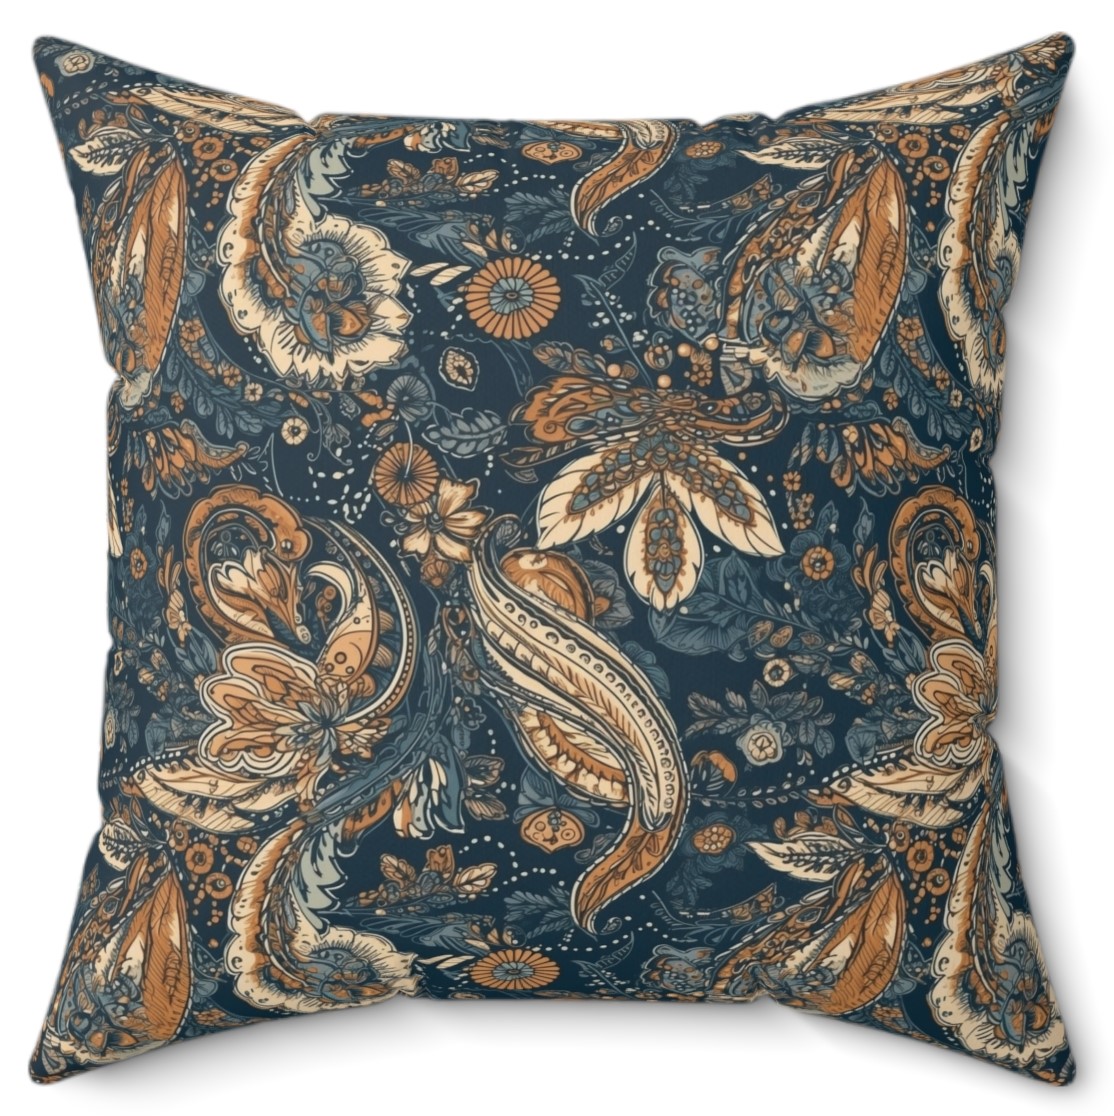 Stylish and Refined Floral Paisley Square Pillow